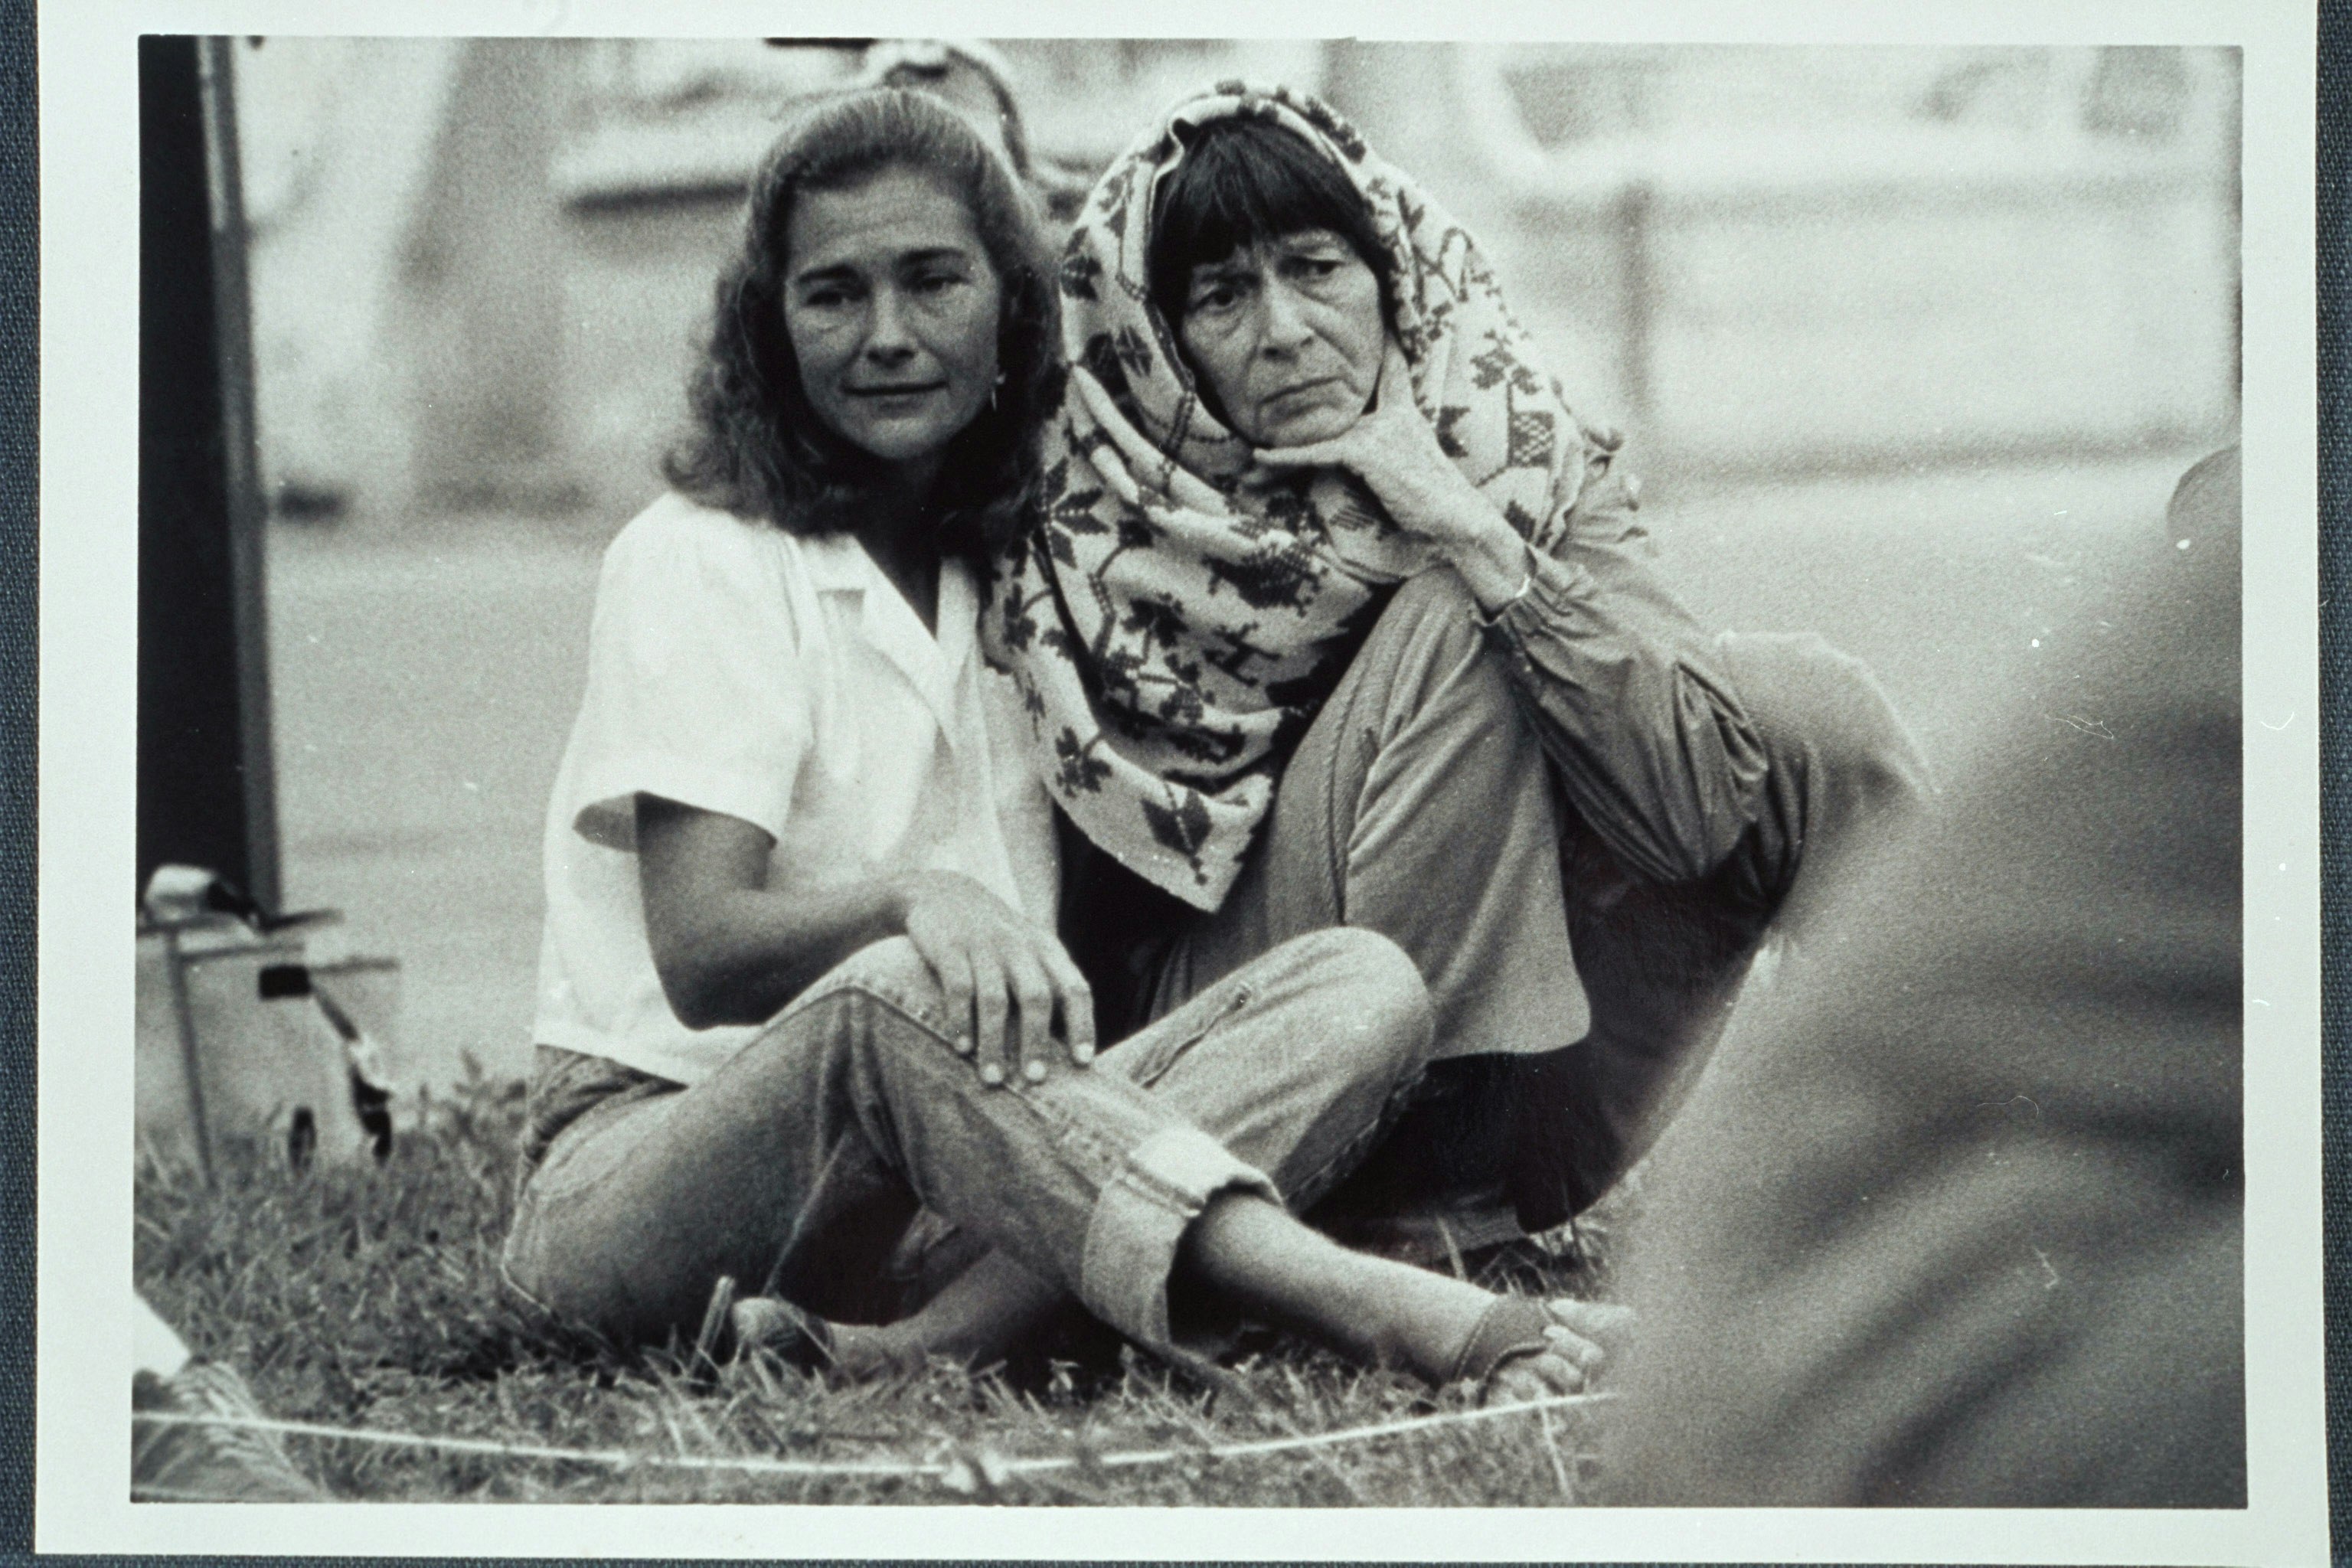 Barbara Deming, wrapped in a shawl, and an unidentified woman seated on the ground